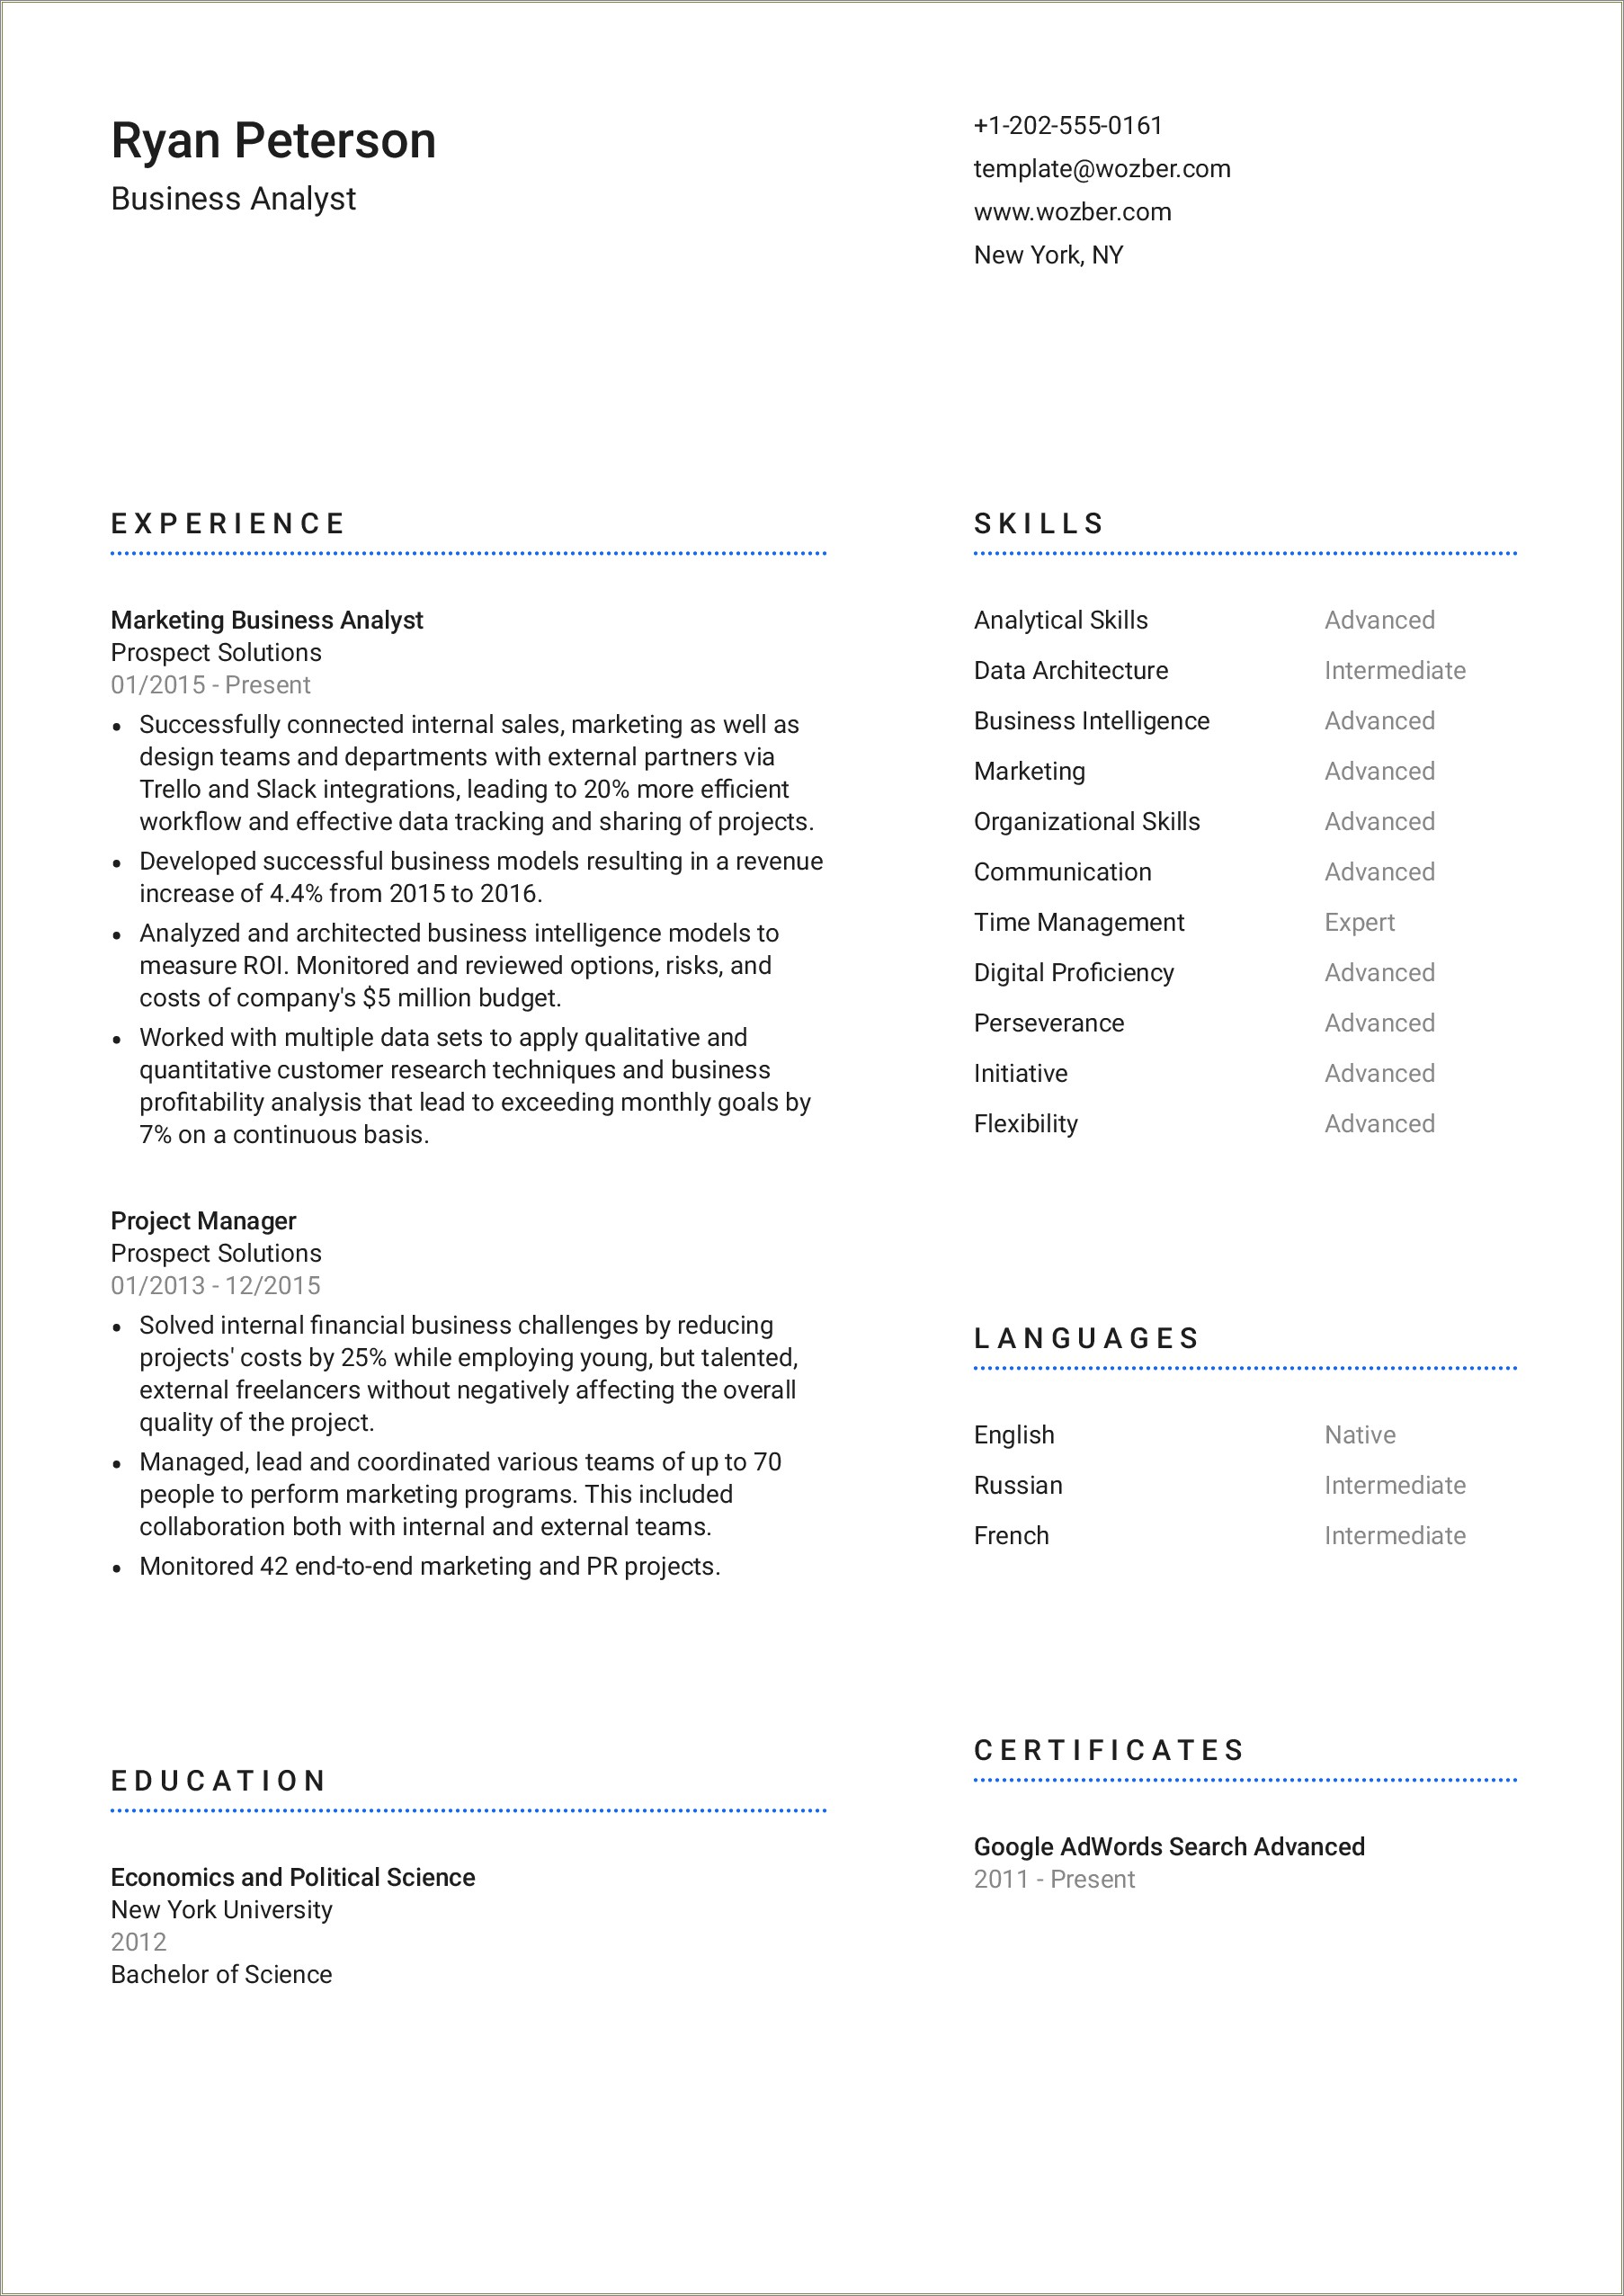 Where Can I Find A Free Resume Templates